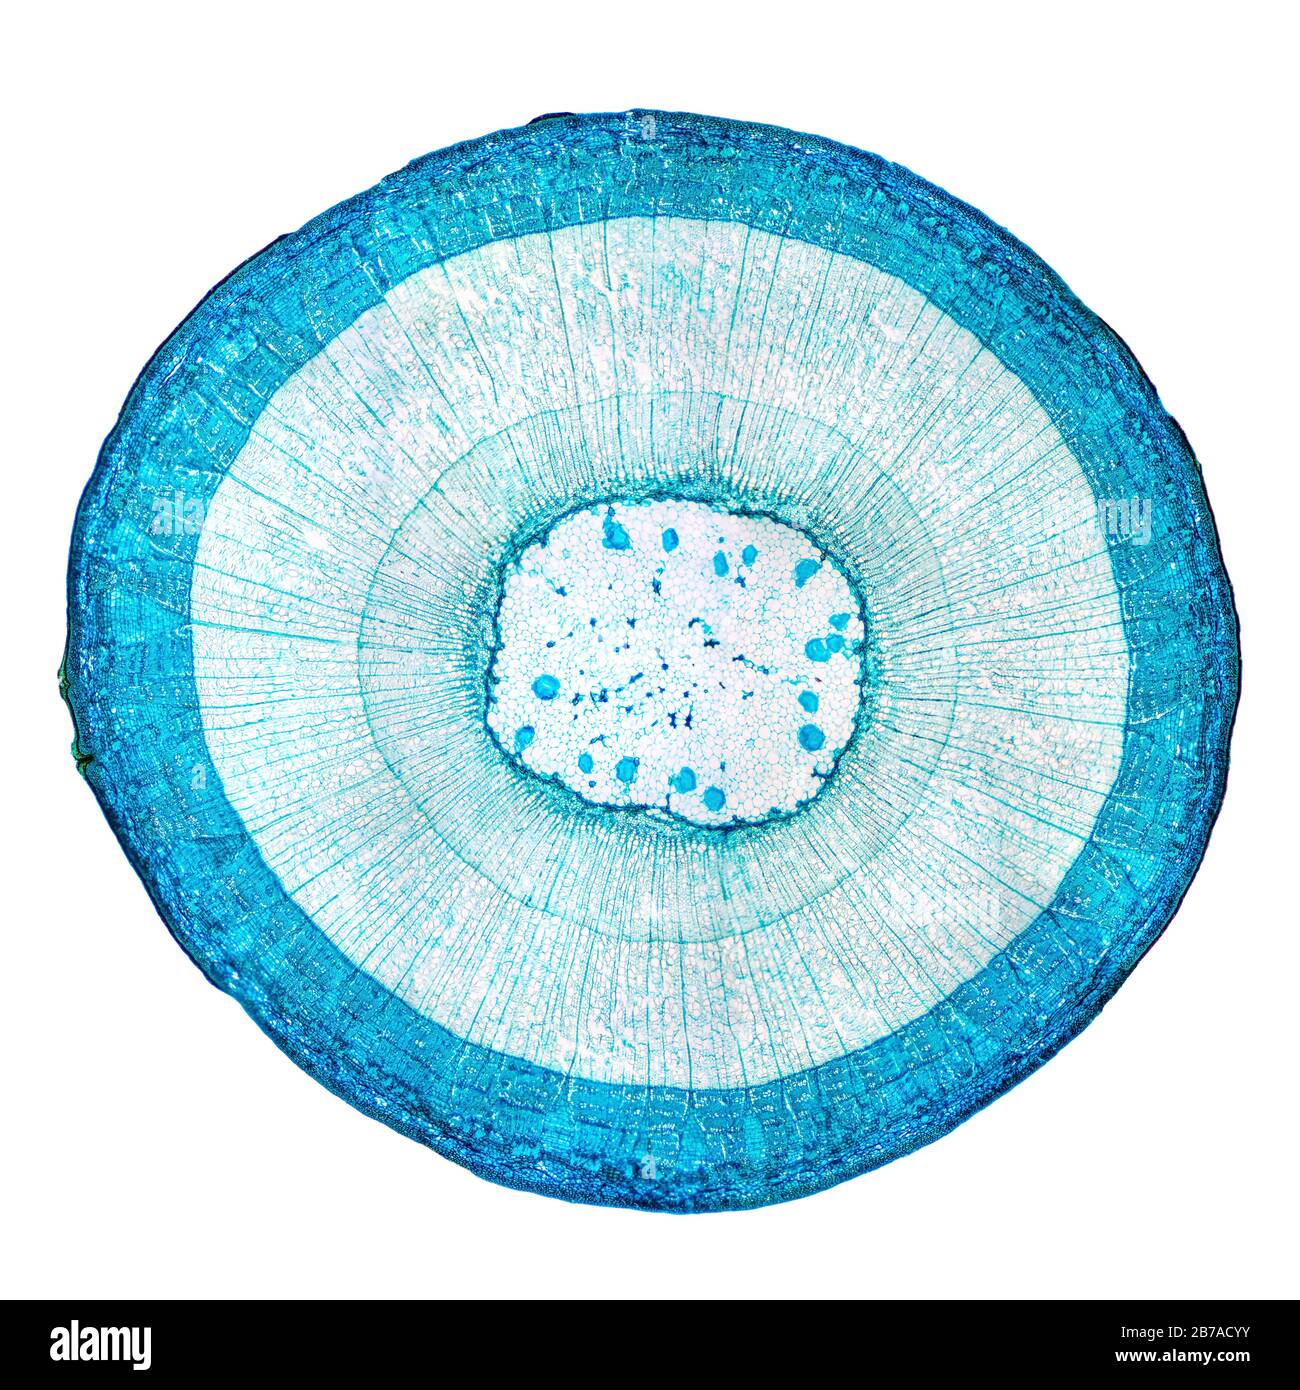 Stem of wood dicotyledon, whole cross section under microscope. Light microscope slide with the microsection of a wood stem with vascular bundles. Stock Photo